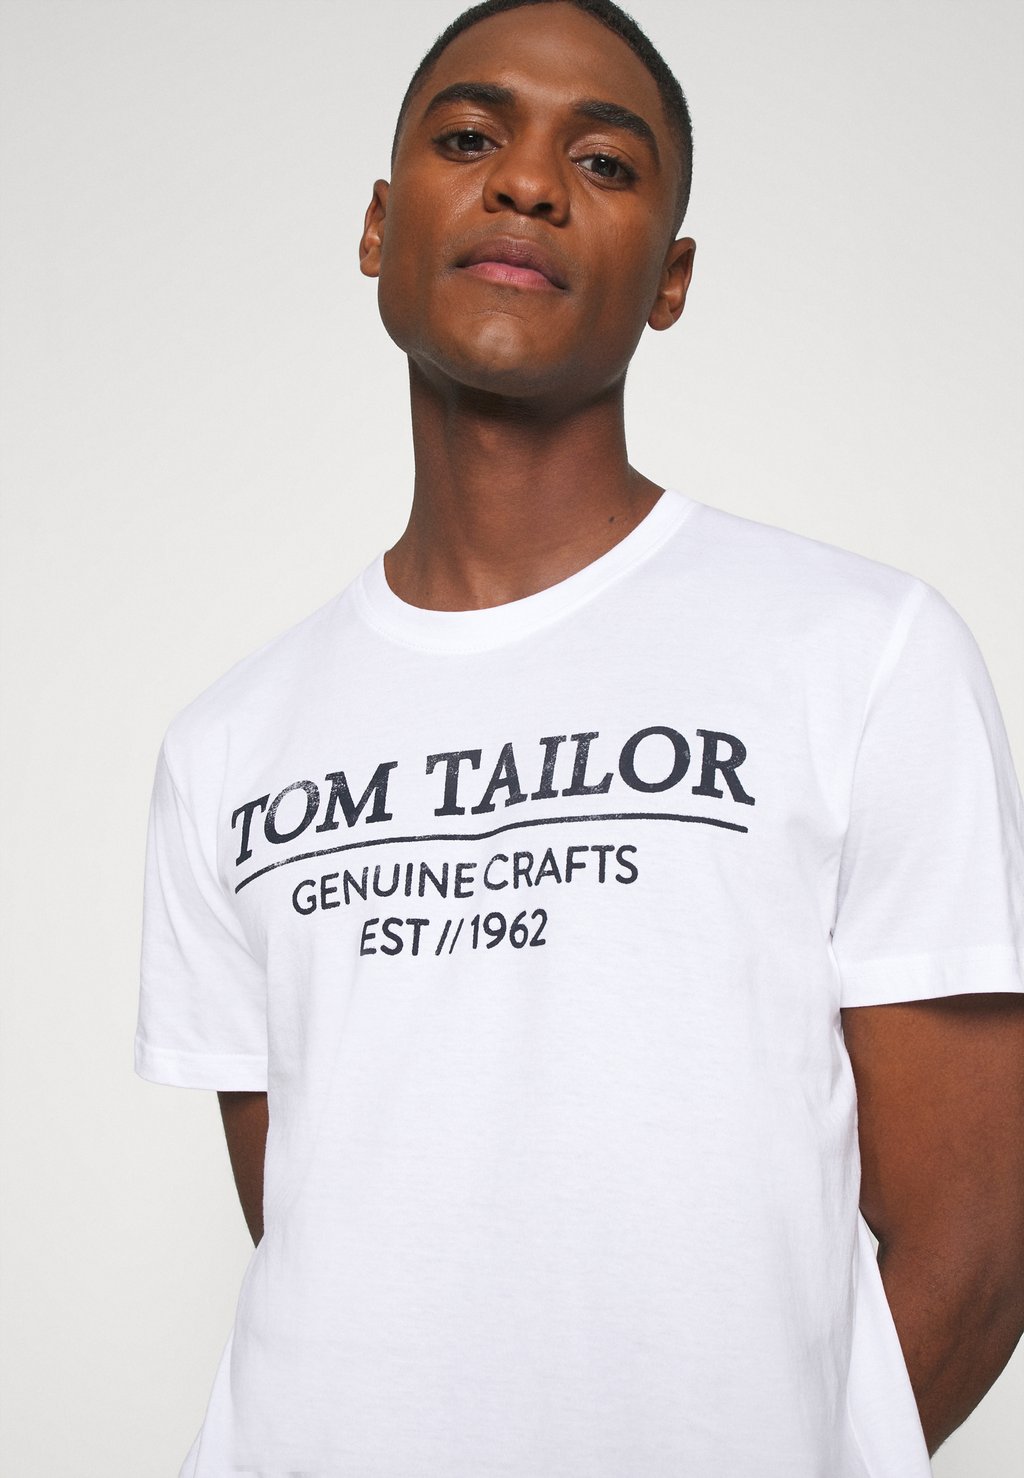 Authentic Design Pure quality 1962 established Tom Tailor effortless кофта. Тейлор бел